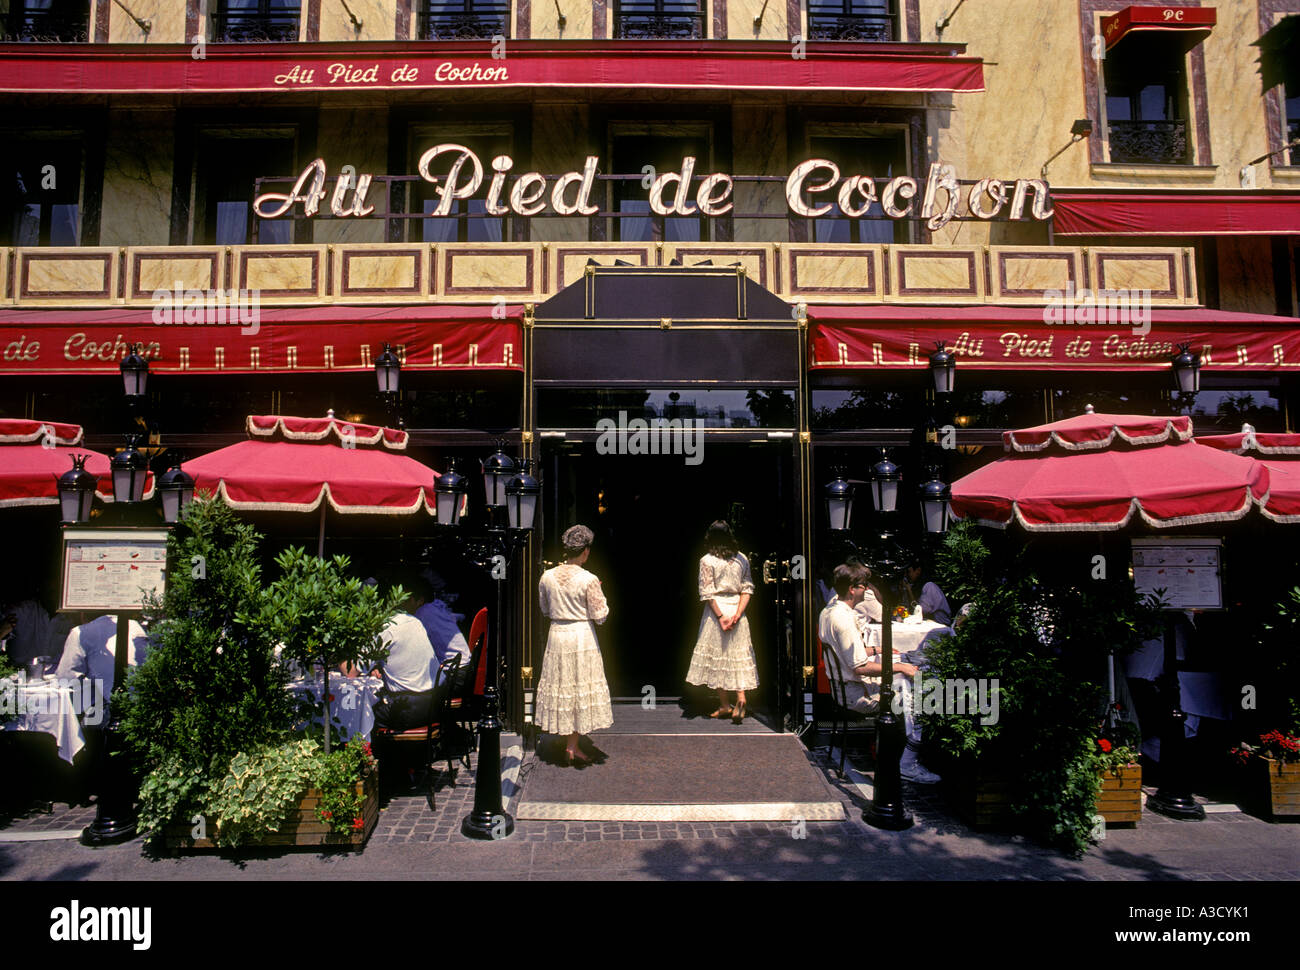 French people, waitresses, hostess, Au Pied de Cochon restaurant, French food, French food and drink, French cuisine, Paris, Ile-de-France, France Stock Photo